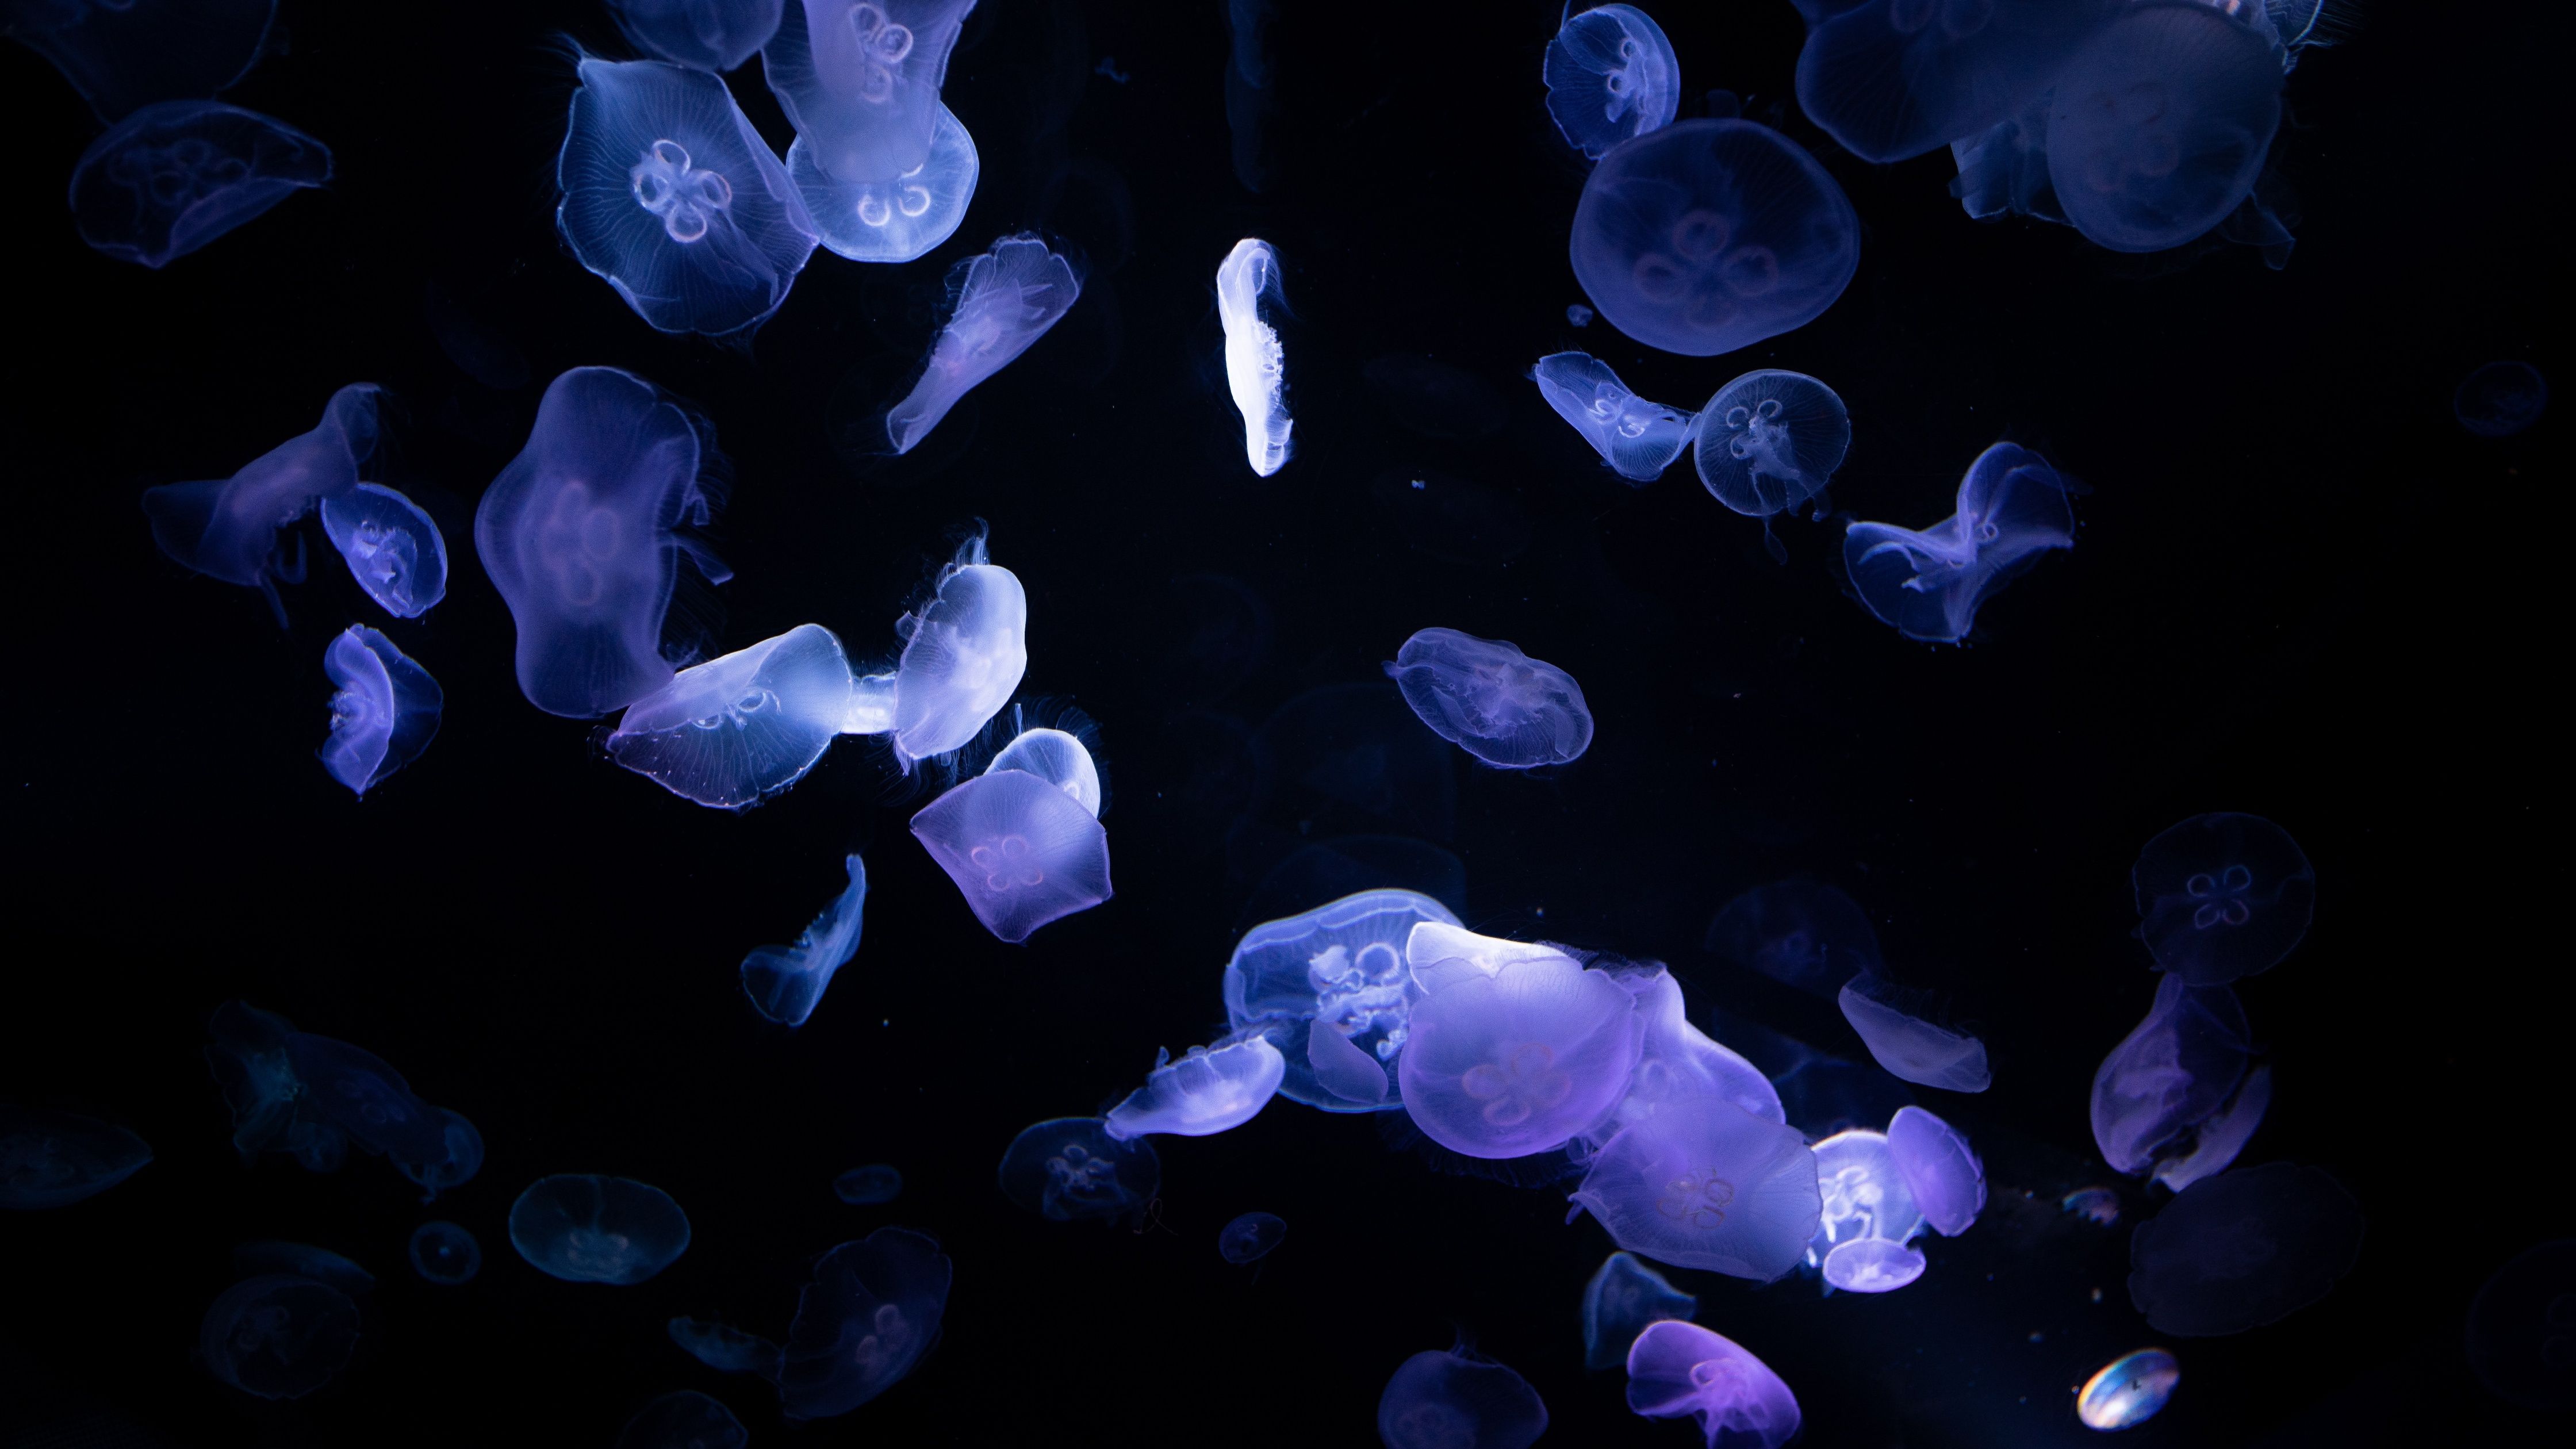 A group of jellyfish floating in the water - Underwater